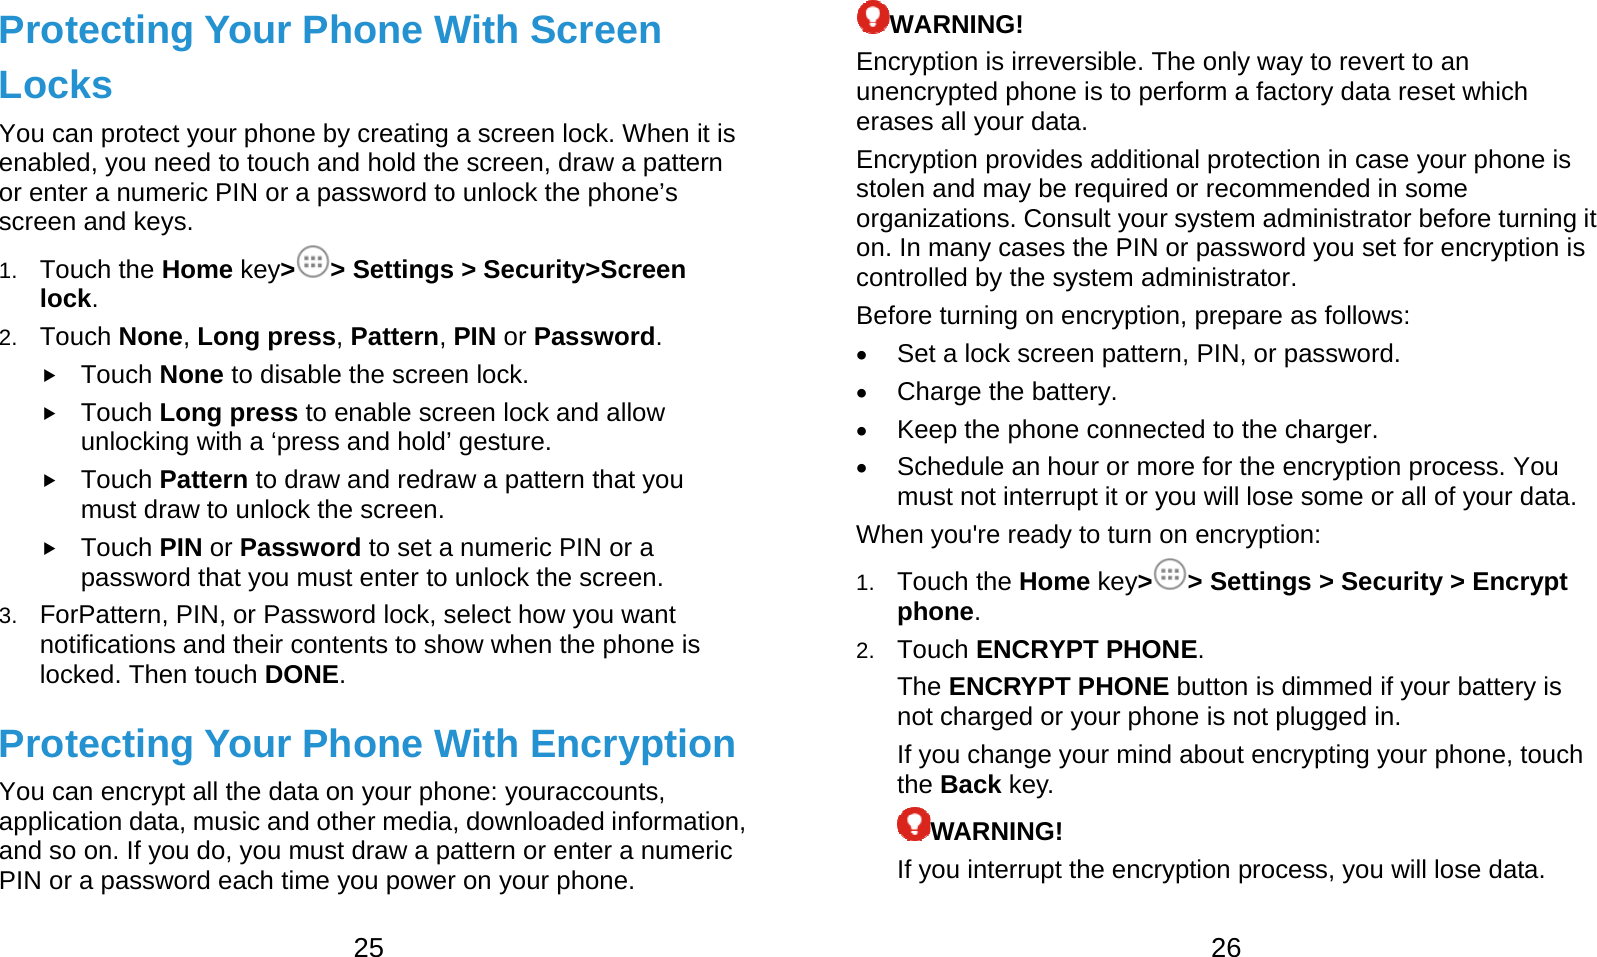  25 Protecting Your Phone With Screen Locks You can protect your phone by creating a screen lock. When it is enabled, you need to touch and hold the screen, draw a pattern or enter a numeric PIN or a password to unlock the phone’s screen and keys. 1.  Touch the Home key&gt;&gt; Settings &gt; Security&gt;Screen lock. 2.  Touch None, Long press, Pattern, PIN or Password.  Touch None to disable the screen lock.  Touch Long press to enable screen lock and allow unlocking with a ‘press and hold’ gesture.  Touch Pattern to draw and redraw a pattern that you must draw to unlock the screen.  Touch PIN or Password to set a numeric PIN or a password that you must enter to unlock the screen. 3.  ForPattern, PIN, or Password lock, select how you want notifications and their contents to show when the phone is locked. Then touch DONE. Protecting Your Phone With Encryption You can encrypt all the data on your phone: youraccounts, application data, music and other media, downloaded information, and so on. If you do, you must draw a pattern or enter a numeric PIN or a password each time you power on your phone.  26 WARNING! Encryption is irreversible. The only way to revert to an unencrypted phone is to perform a factory data reset which erases all your data. Encryption provides additional protection in case your phone is stolen and may be required or recommended in some organizations. Consult your system administrator before turning it on. In many cases the PIN or password you set for encryption is controlled by the system administrator. Before turning on encryption, prepare as follows:  Set a lock screen pattern, PIN, or password.  Charge the battery.  Keep the phone connected to the charger.  Schedule an hour or more for the encryption process. You must not interrupt it or you will lose some or all of your data. When you&apos;re ready to turn on encryption: 1.  Touch the Home key&gt;&gt; Settings &gt; Security &gt; Encrypt phone. 2.  Touch ENCRYPT PHONE. The ENCRYPT PHONE button is dimmed if your battery is not charged or your phone is not plugged in. If you change your mind about encrypting your phone, touch the Back key. WARNING! If you interrupt the encryption process, you will lose data. 